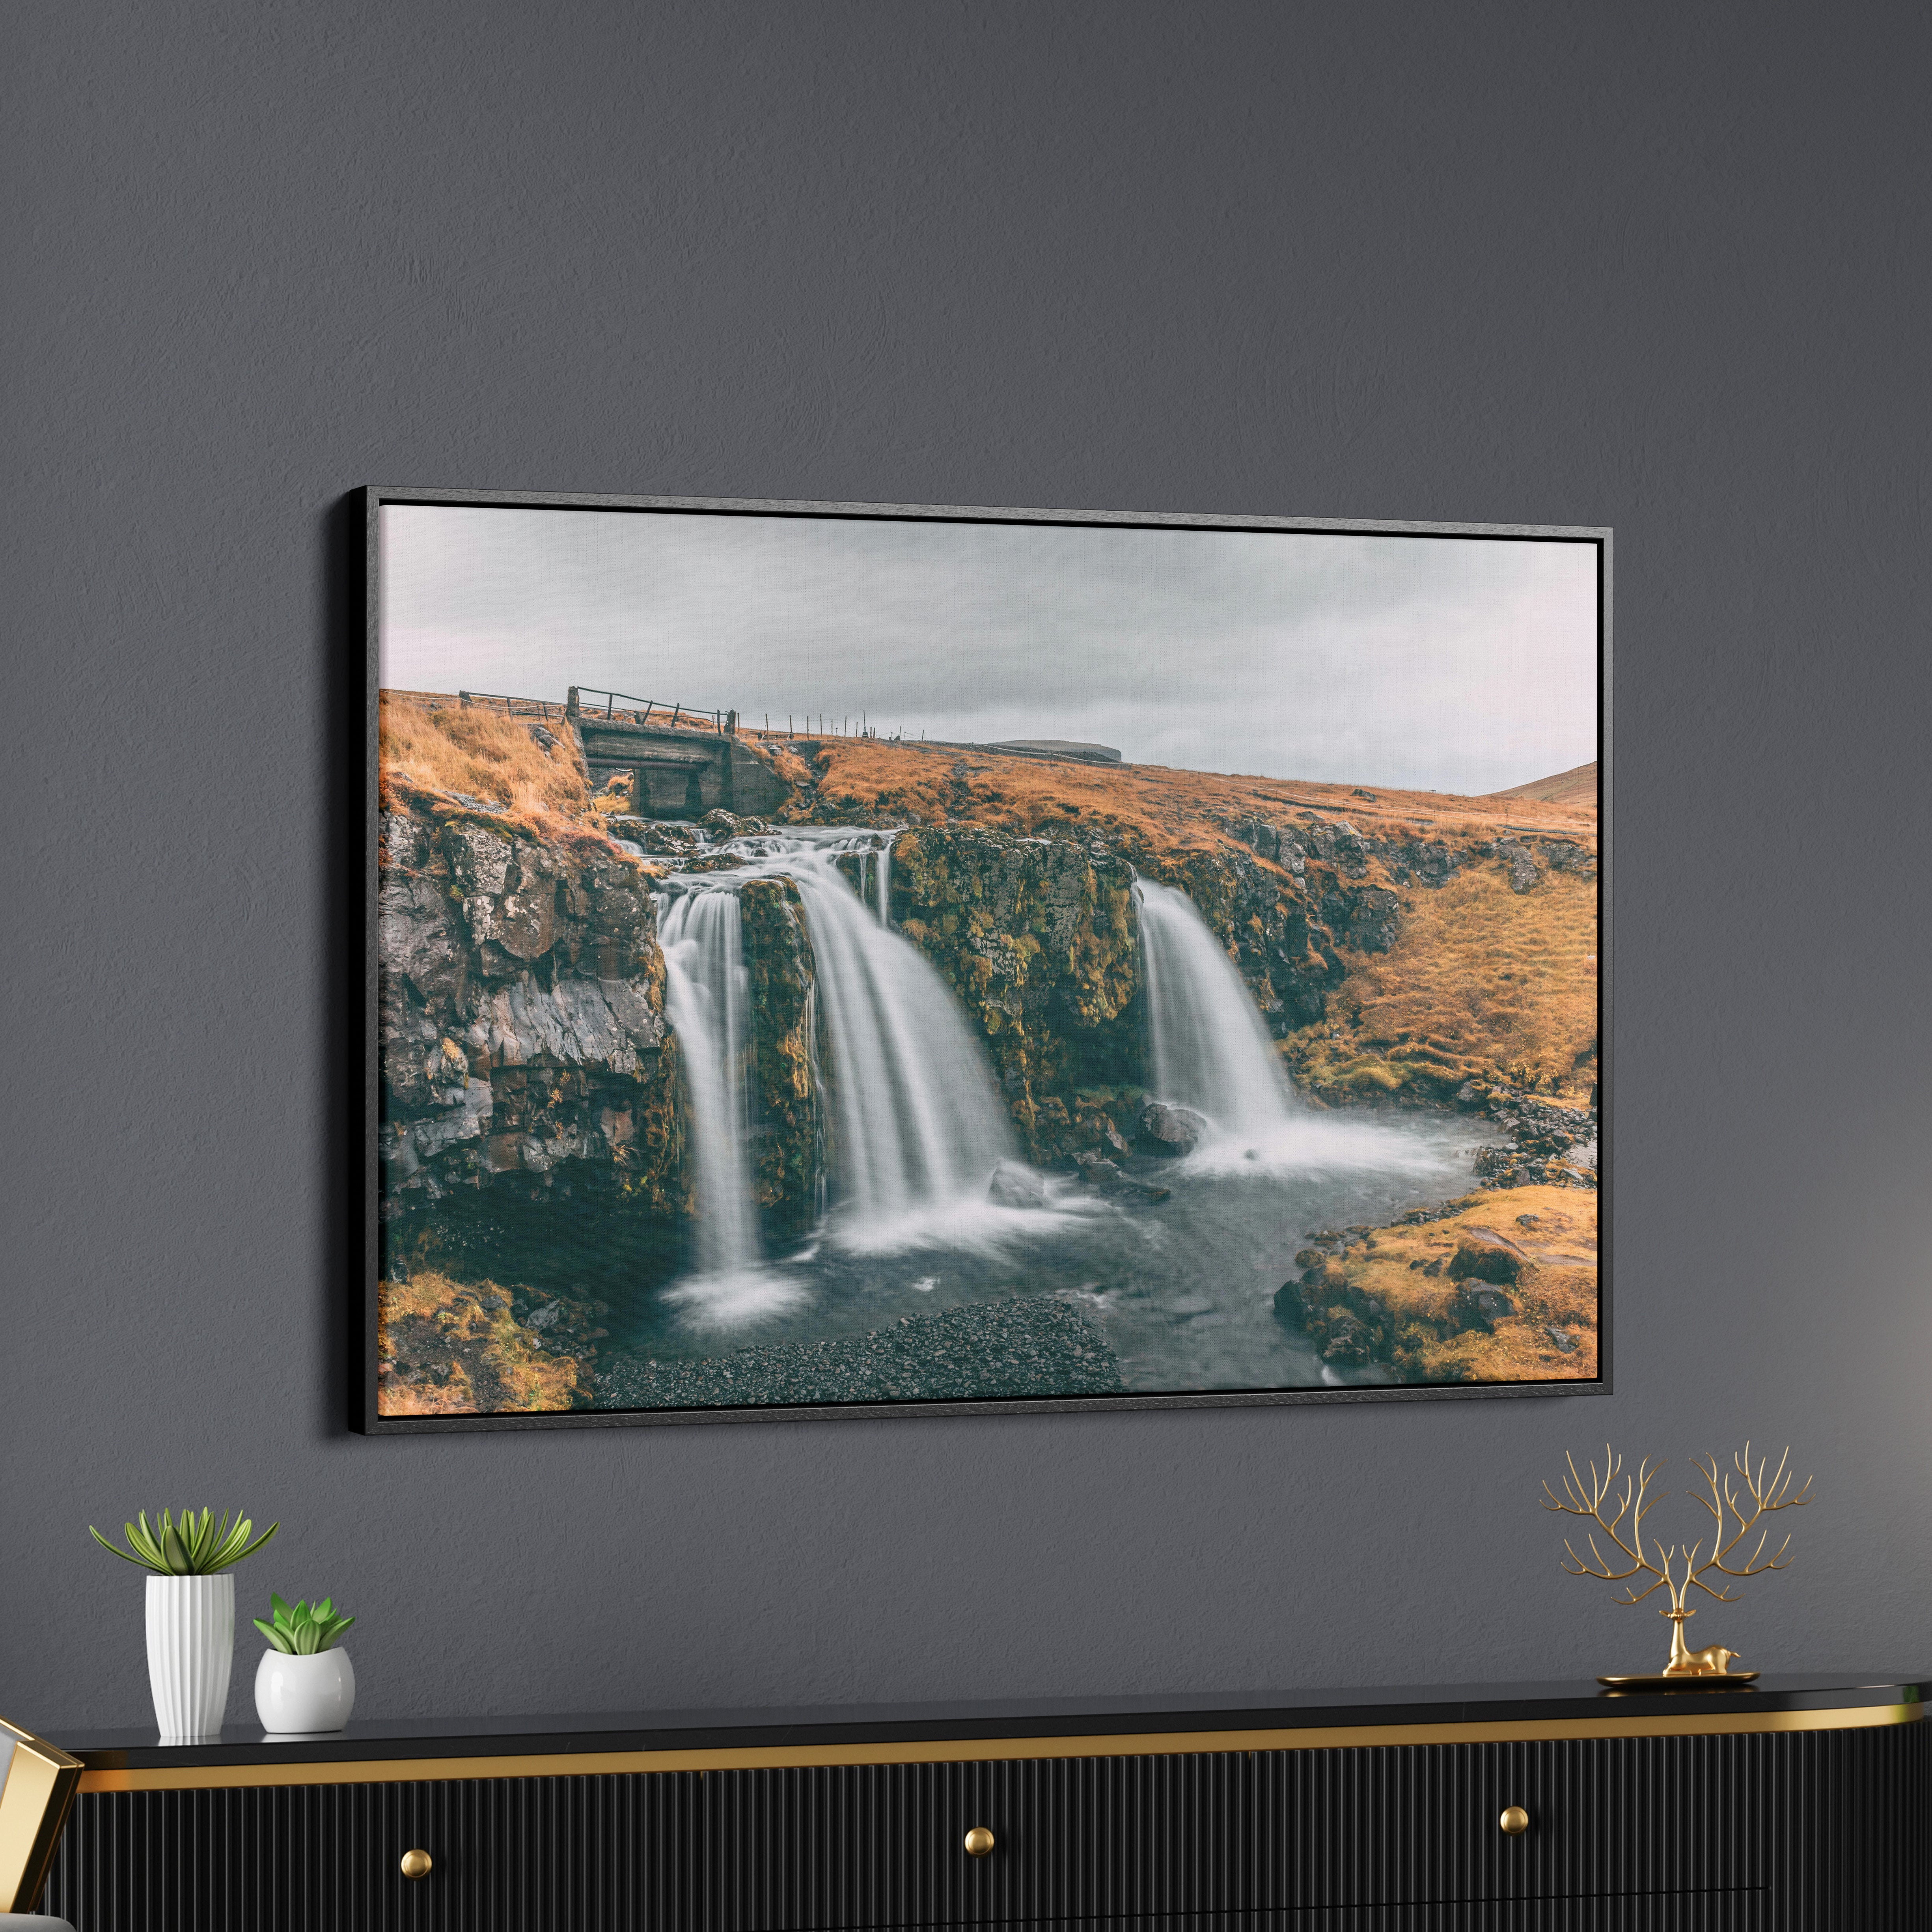 Panoramic Morden Art of Amazing Waterfall in Iceland  Wall Painting